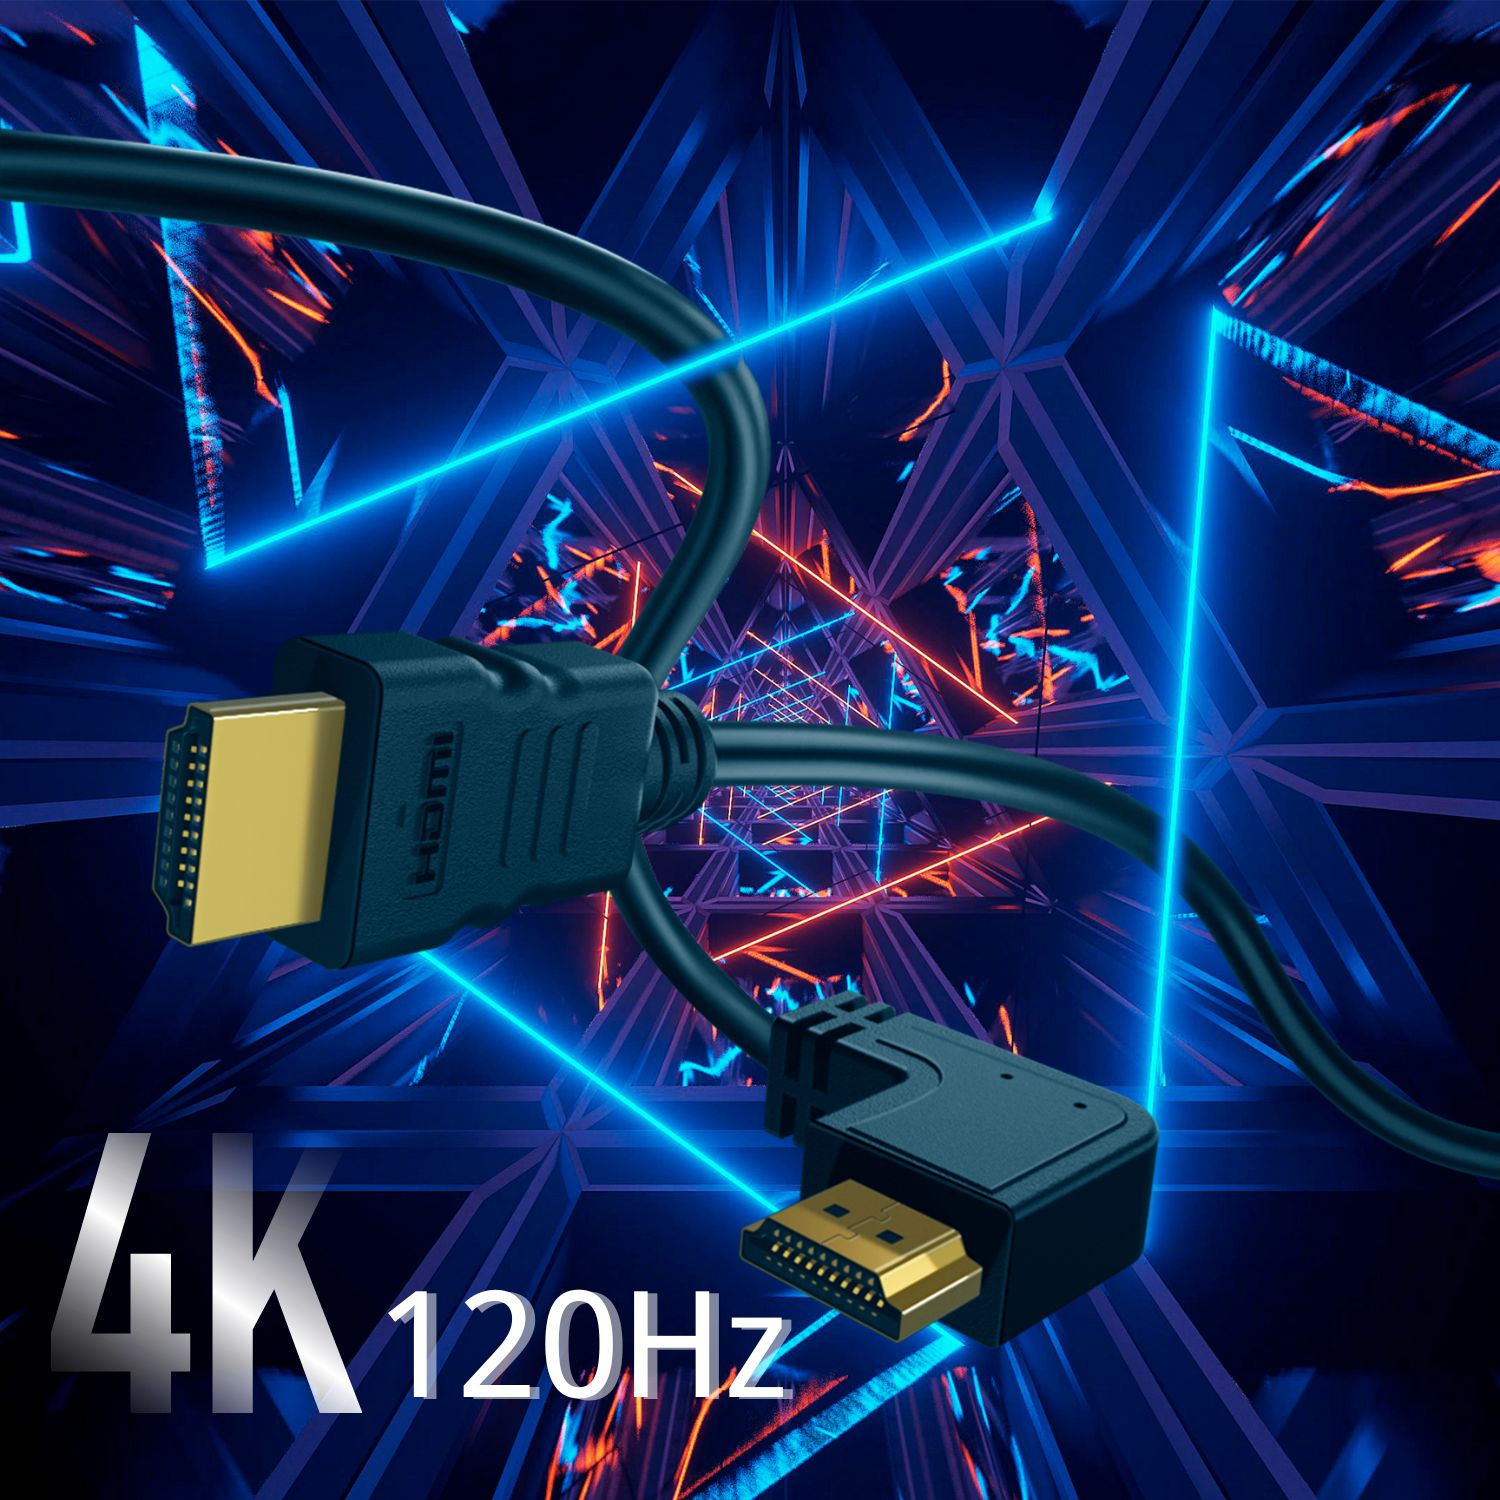 Left Angle HDMI Cable (90 Degree) - Angled design allows better fitting for wall-mounted devices, narrow spaces, solving the embarrassment of limited spaces between wall and device